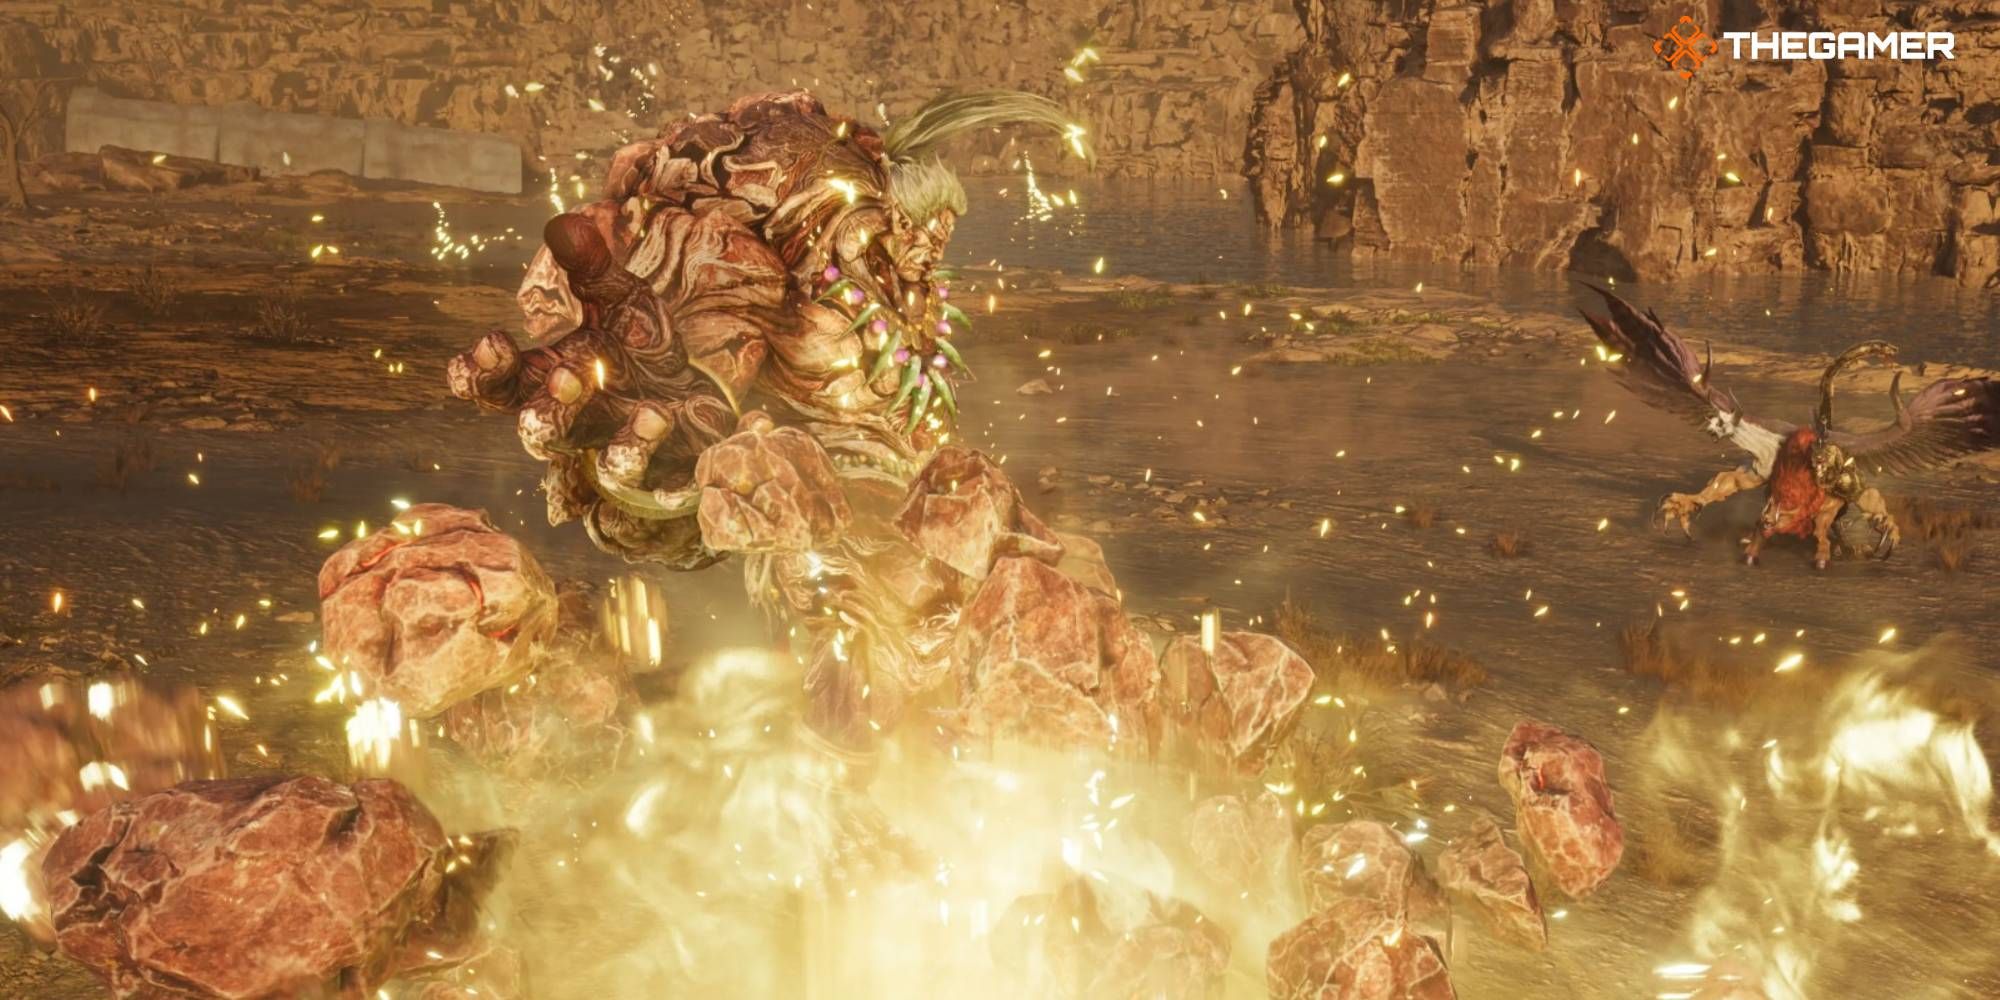 Feature image of Titan battling a Chimera in the Corel region of FF7 Rebirth